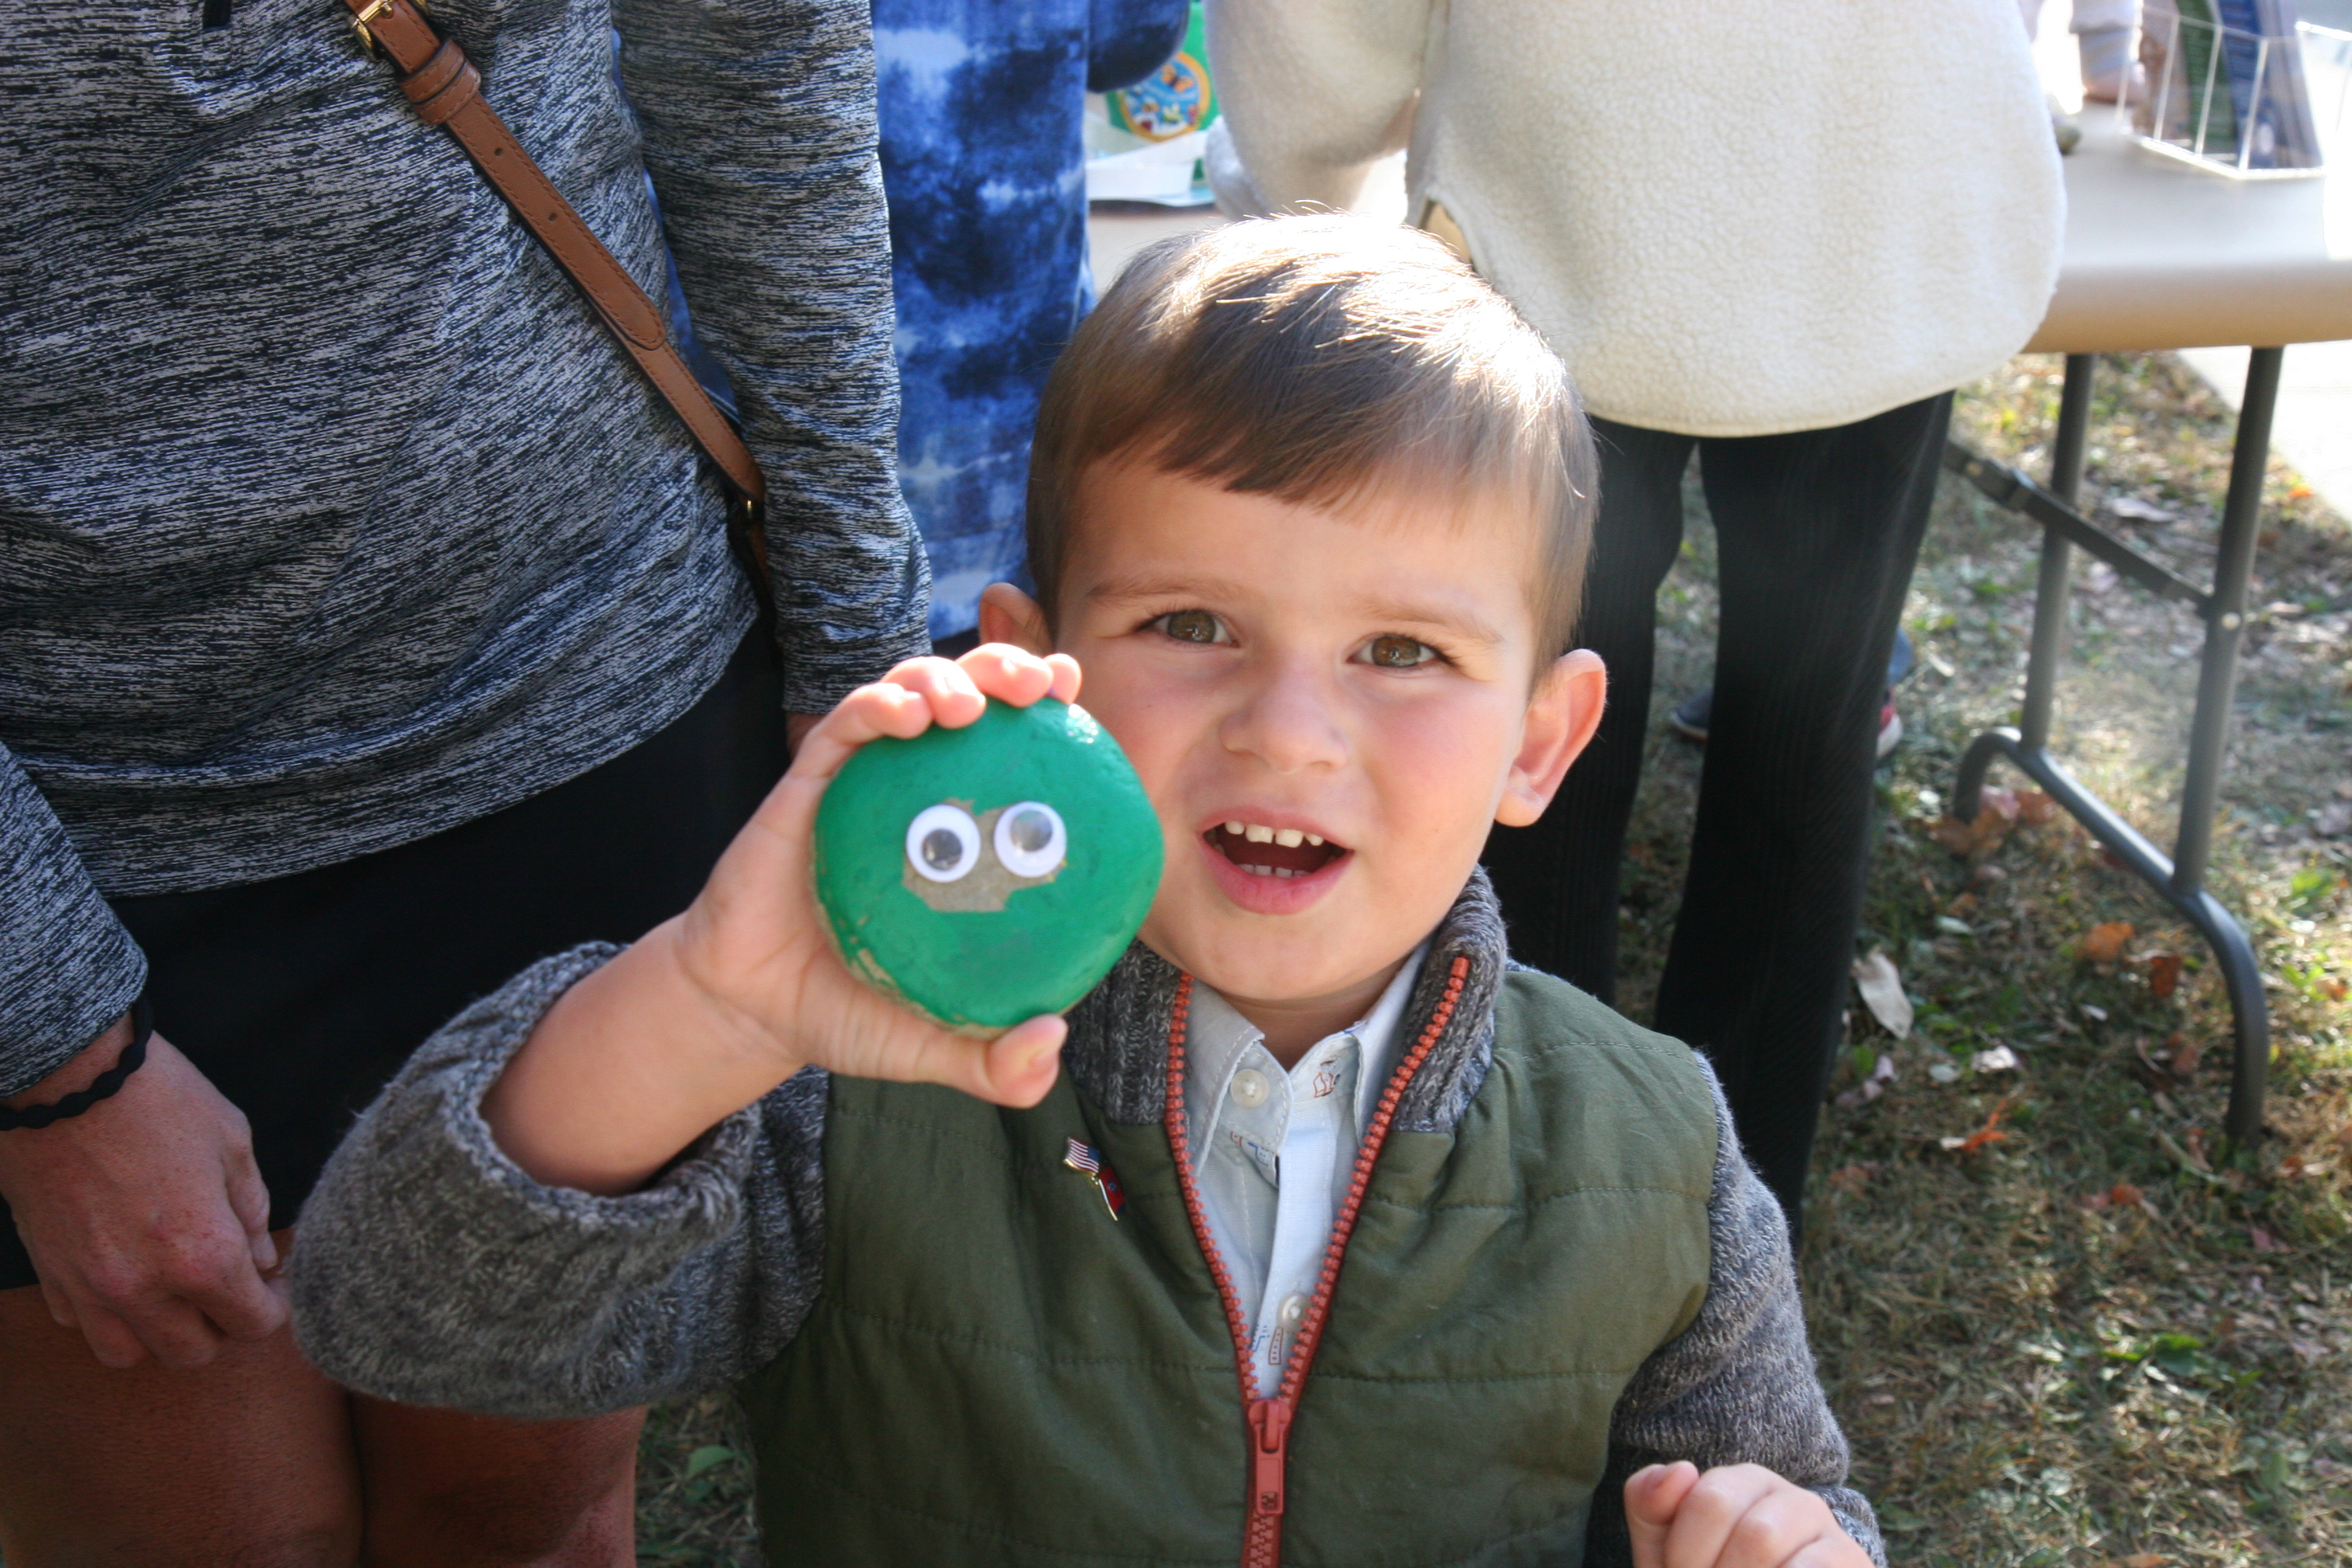 boy holds up green rock with googly eyes